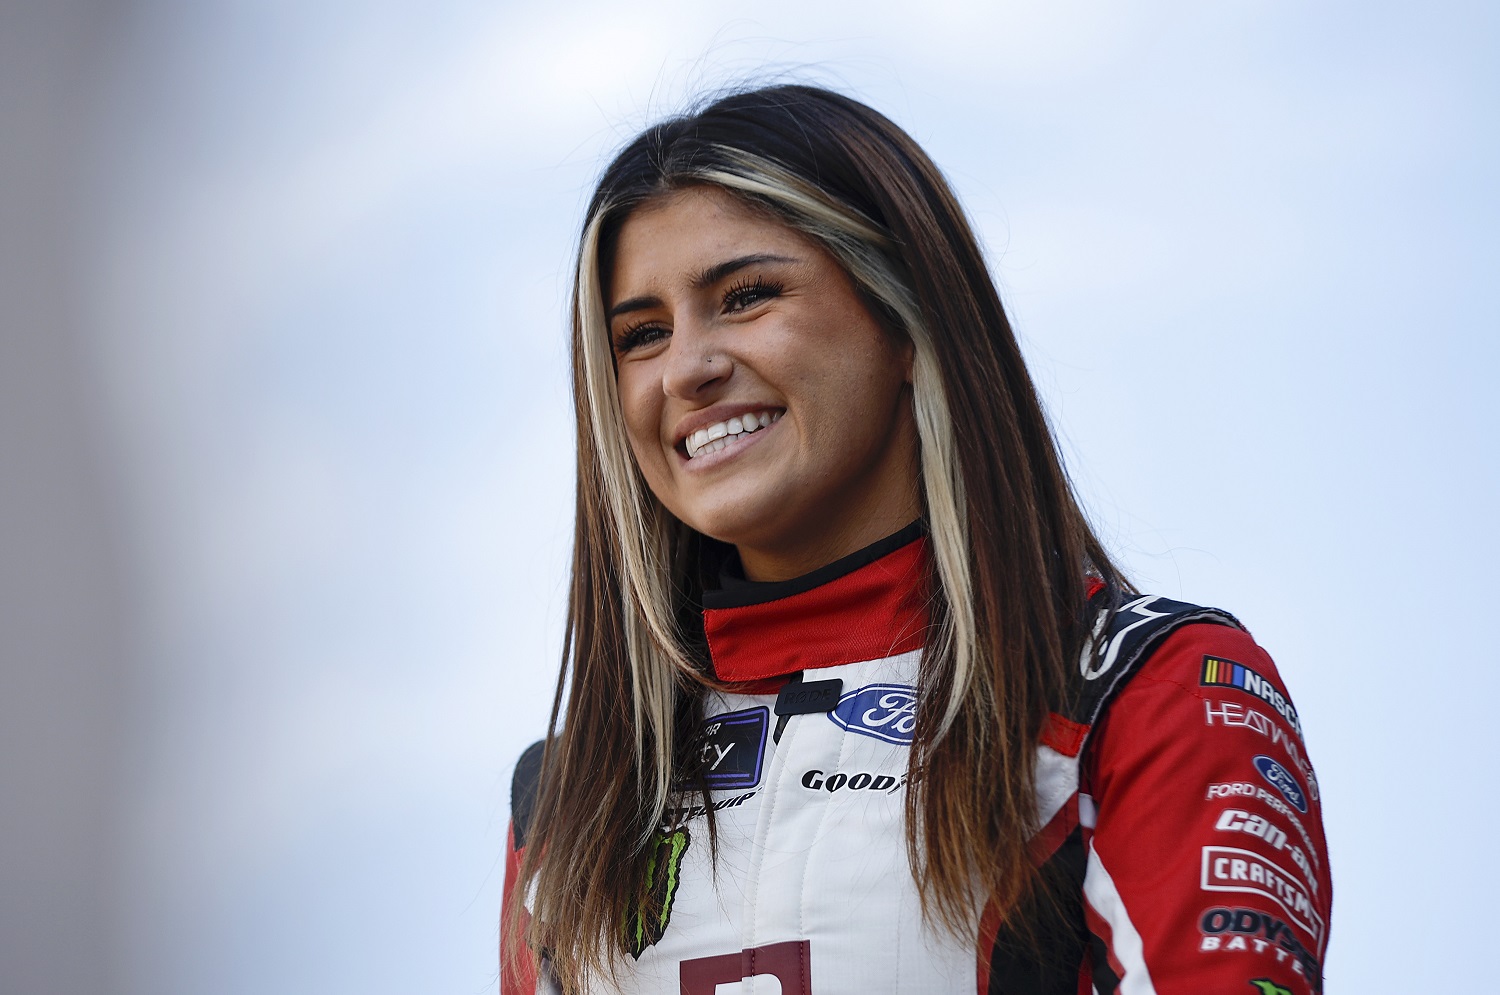 Hailie Deegan walks onstage during driver intros for the NASCAR Xfinity Series Alsco Uniforms 302 at Las Vegas Motor Speedway on Oct. 15, 2022.